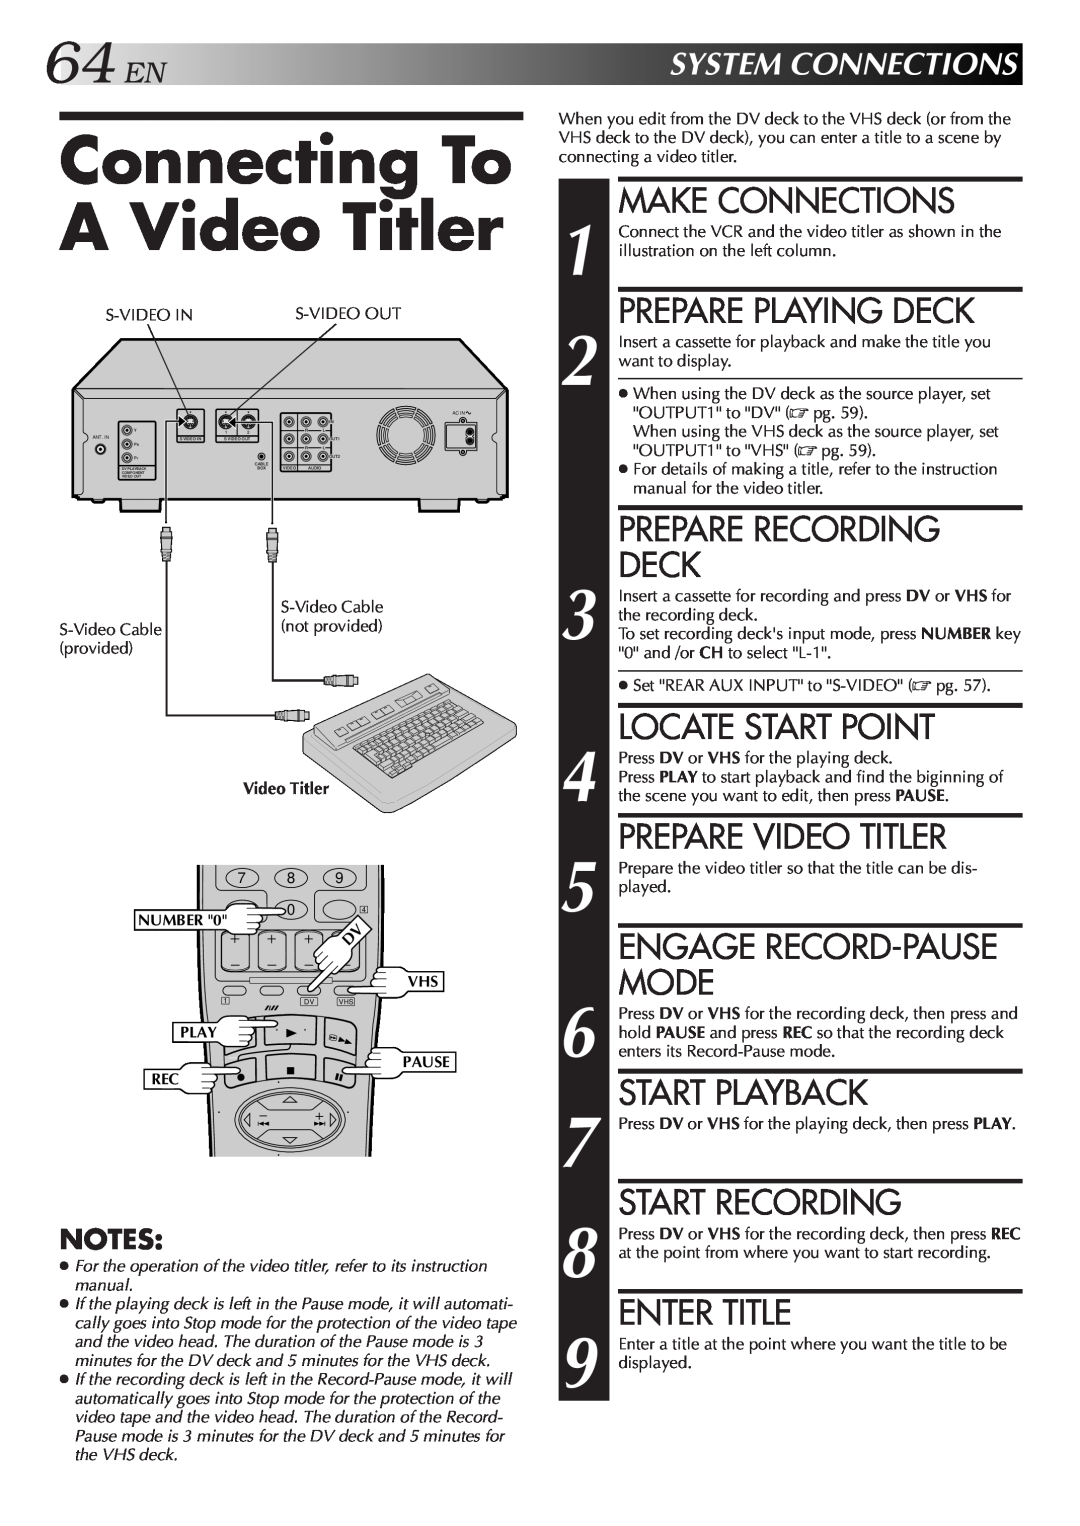 JVC Model HR-DVS1U manual Connecting To A Video Titler, 64ENSYSTEMCONNECTIONS 